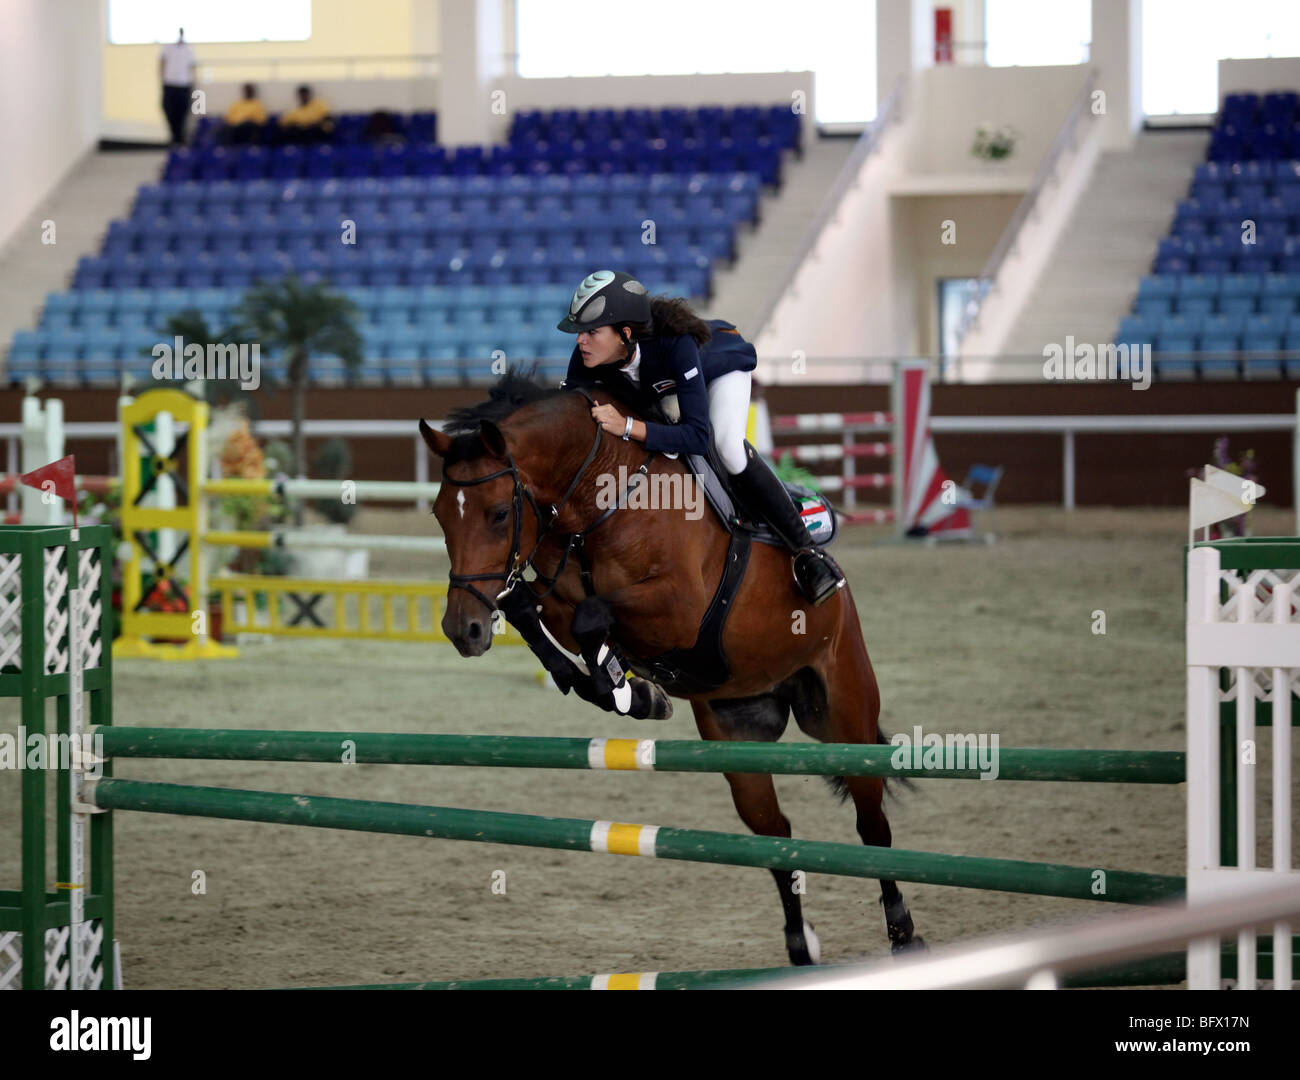 A Kuwaiti woman showjumper in action at a regional competition held at the Qatar Equestrian Federation's indoor arena in Doha Stock Photo